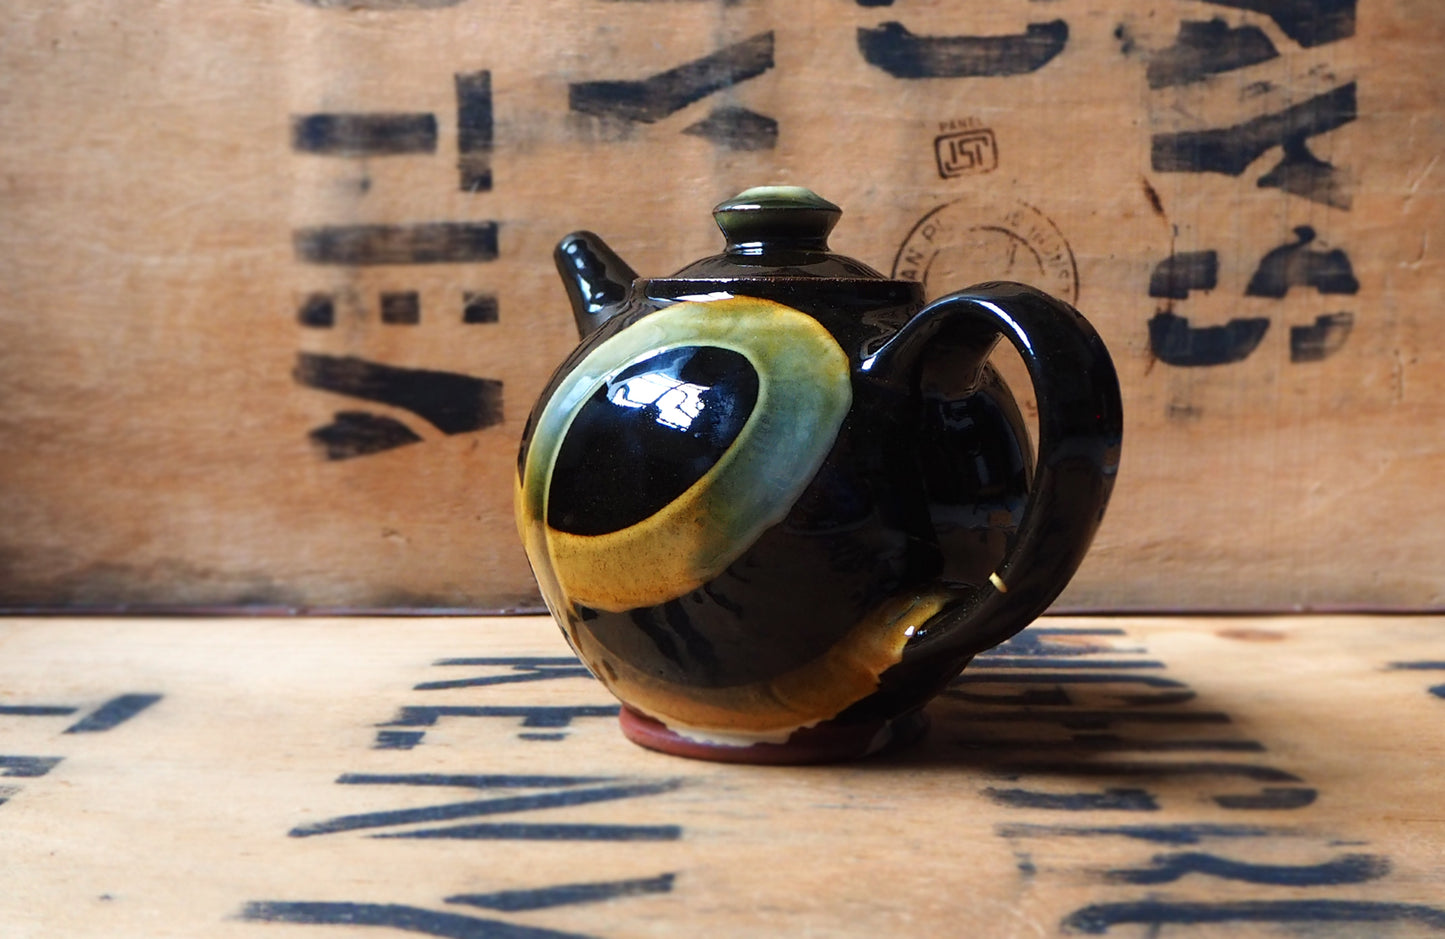 Teapot (1) by Mike Parry